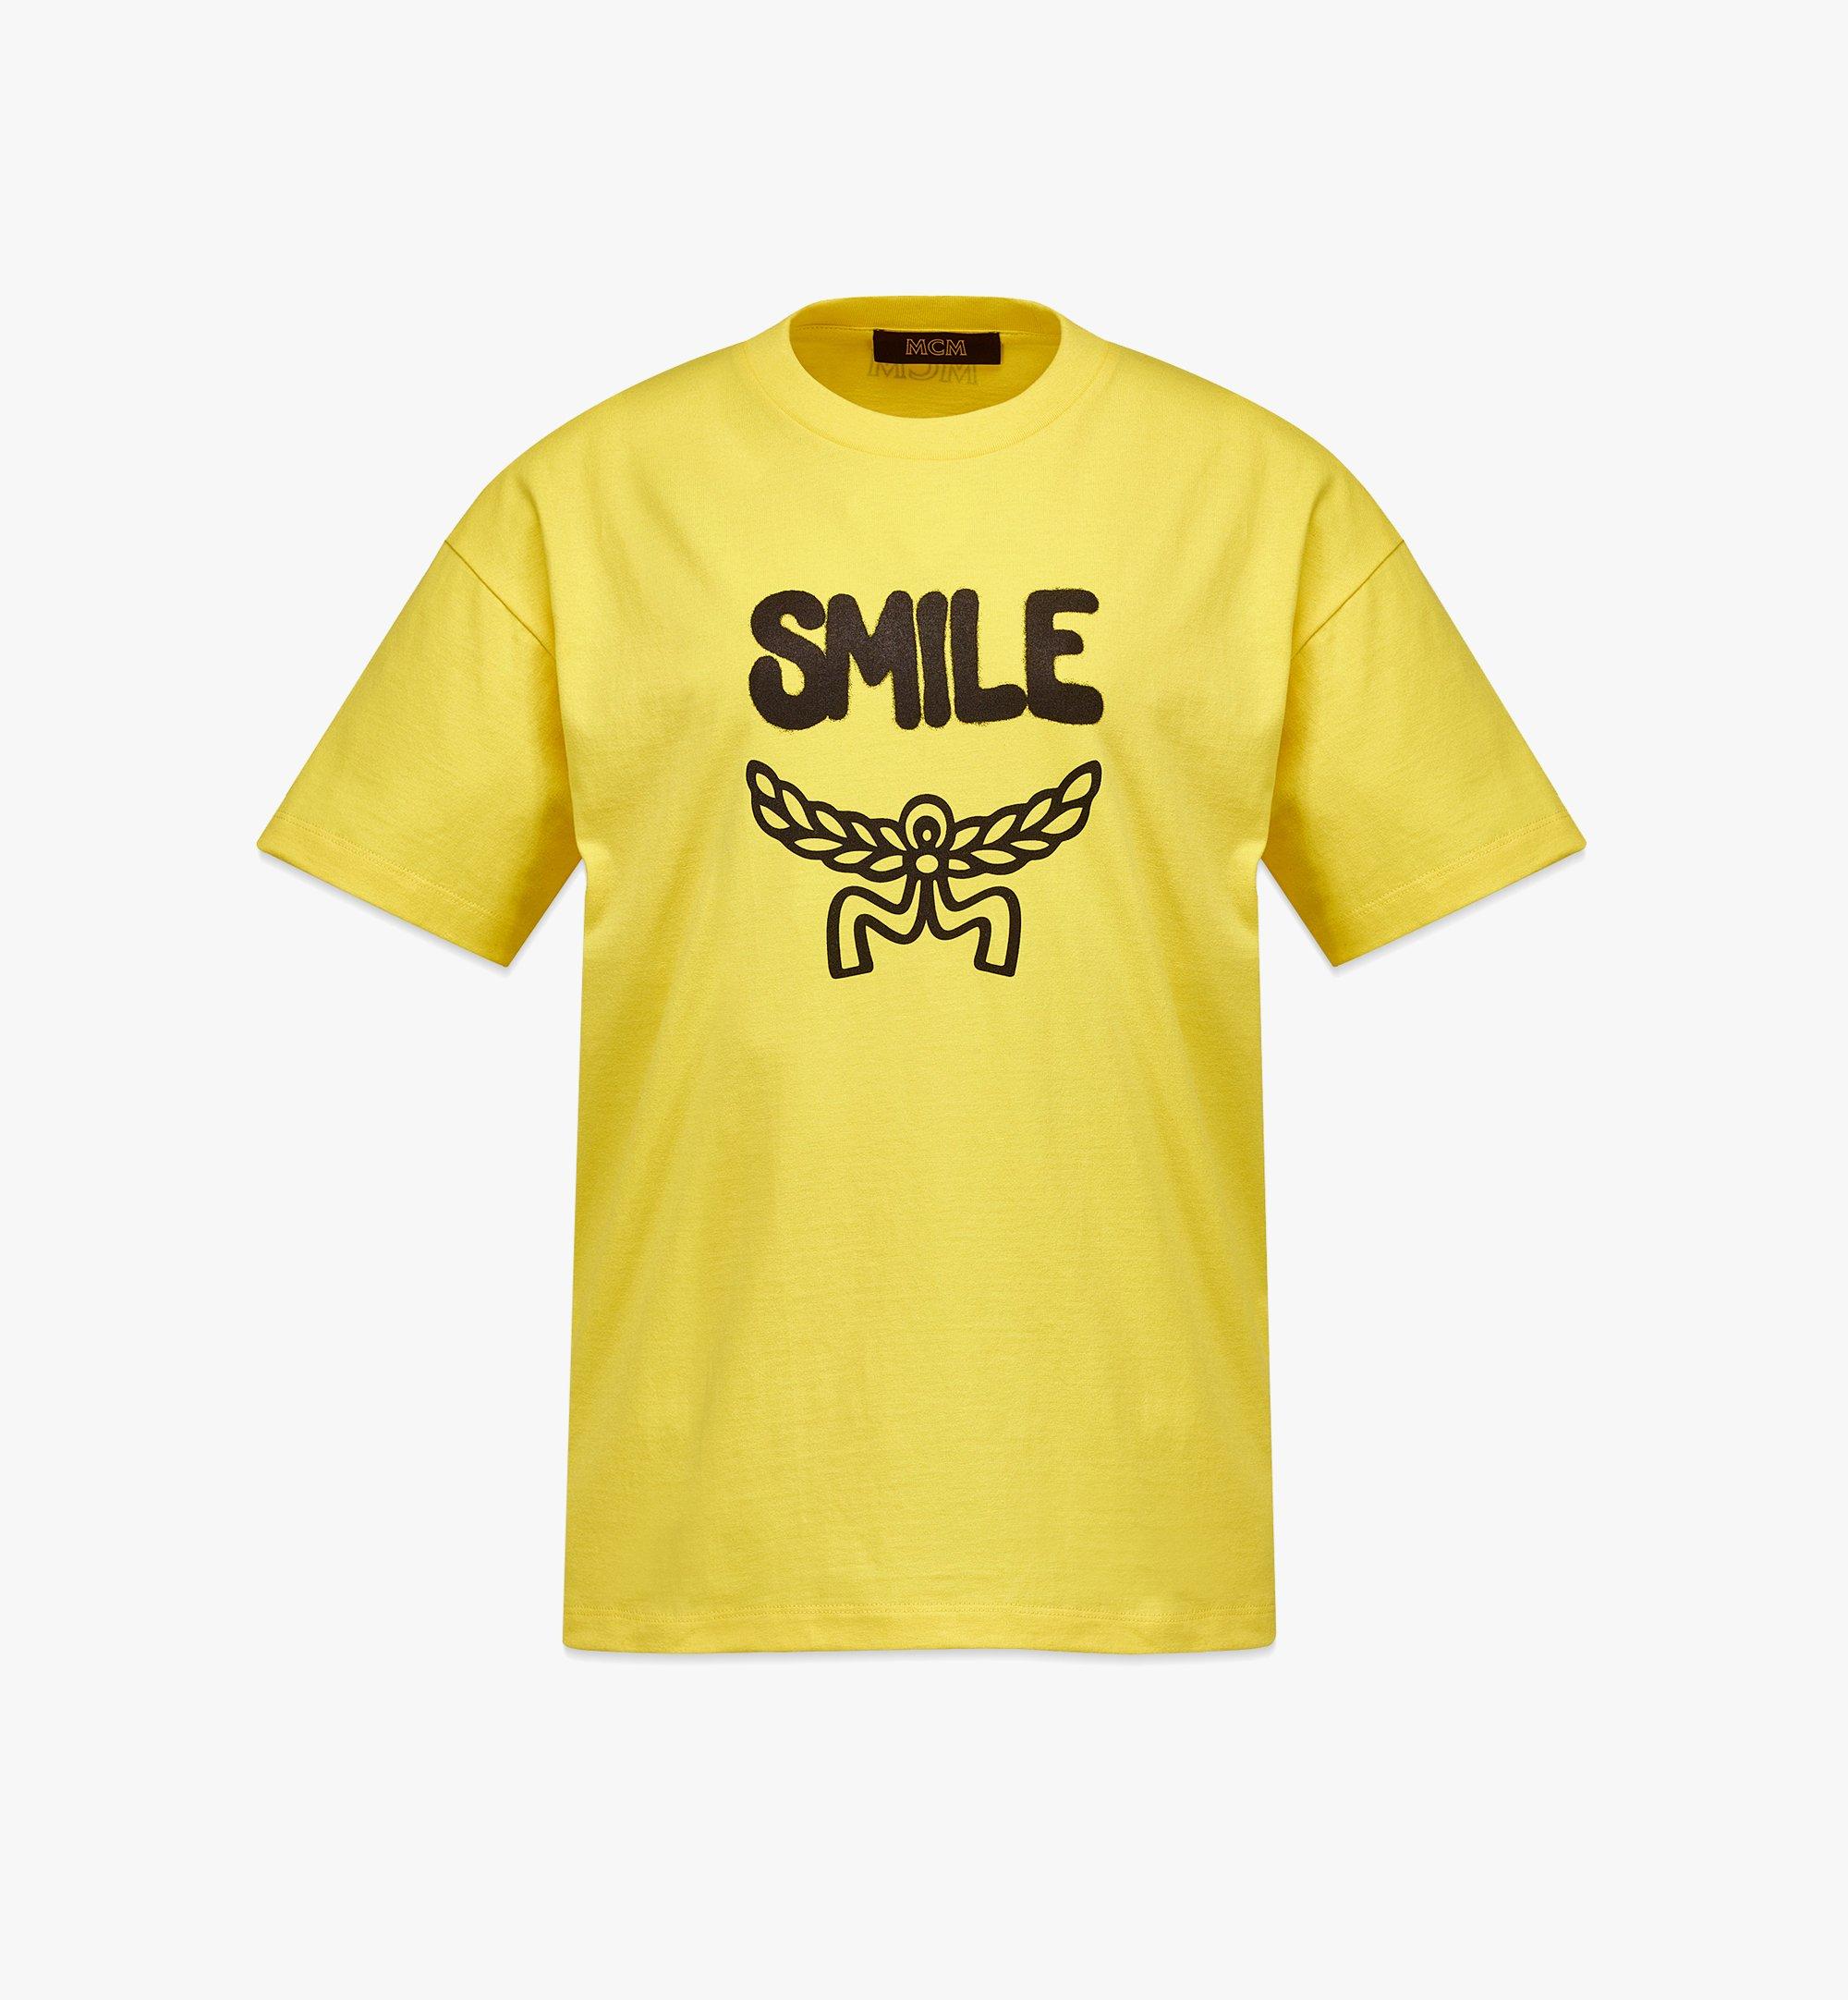 MCM Women’s MCM Collection Smile T-Shirt in Organic Cotton Yellow MFTCSMM02Y300S Alternate View 1